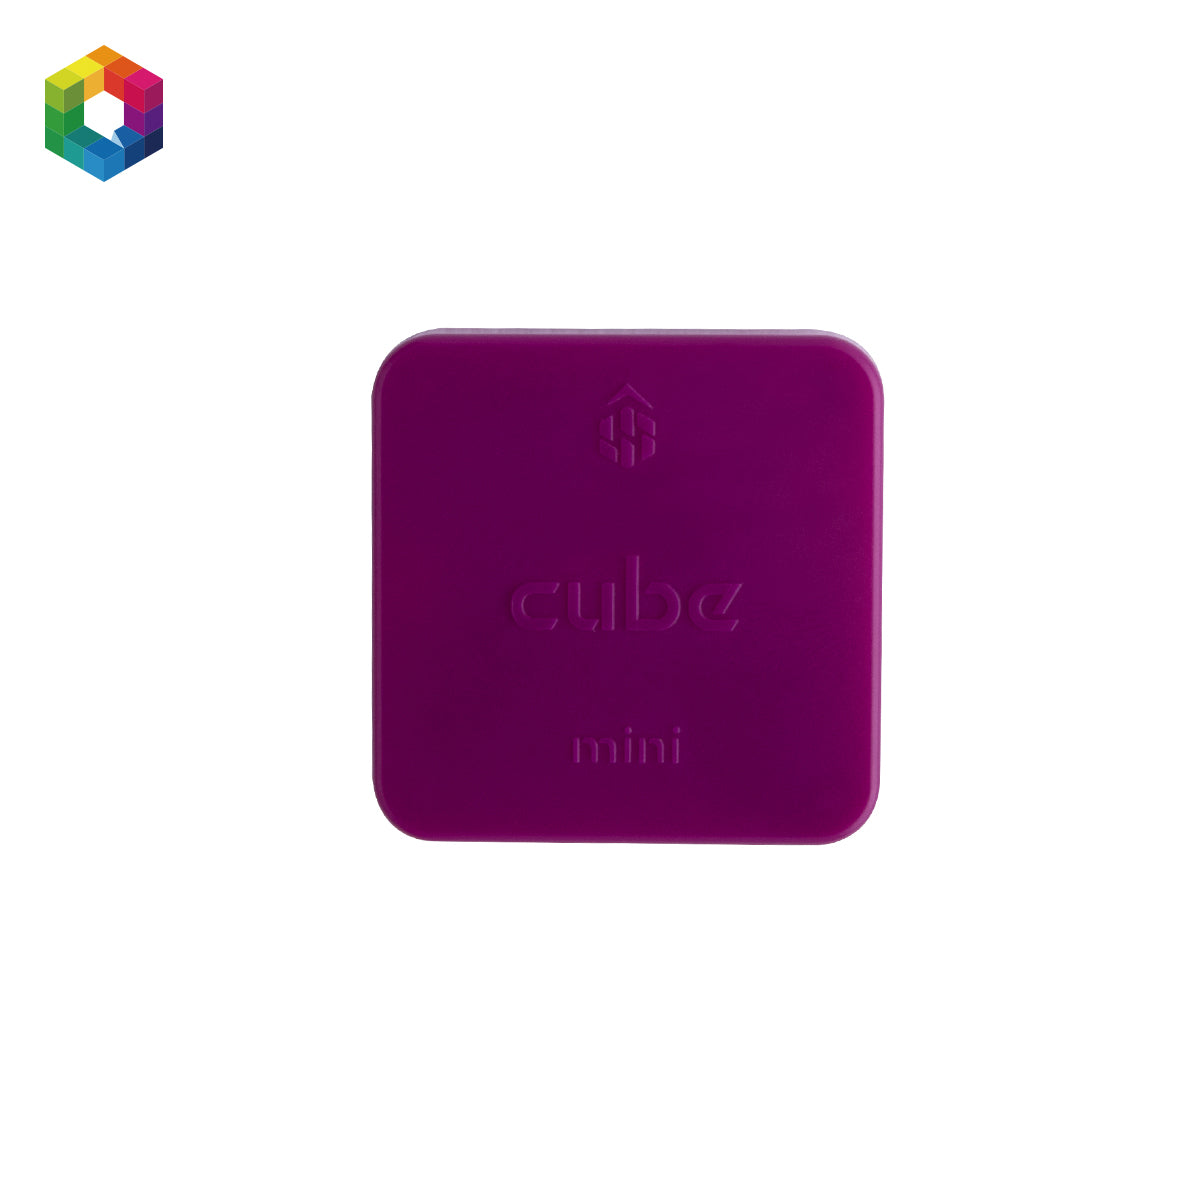 Cube Purple (without Carrier Board)